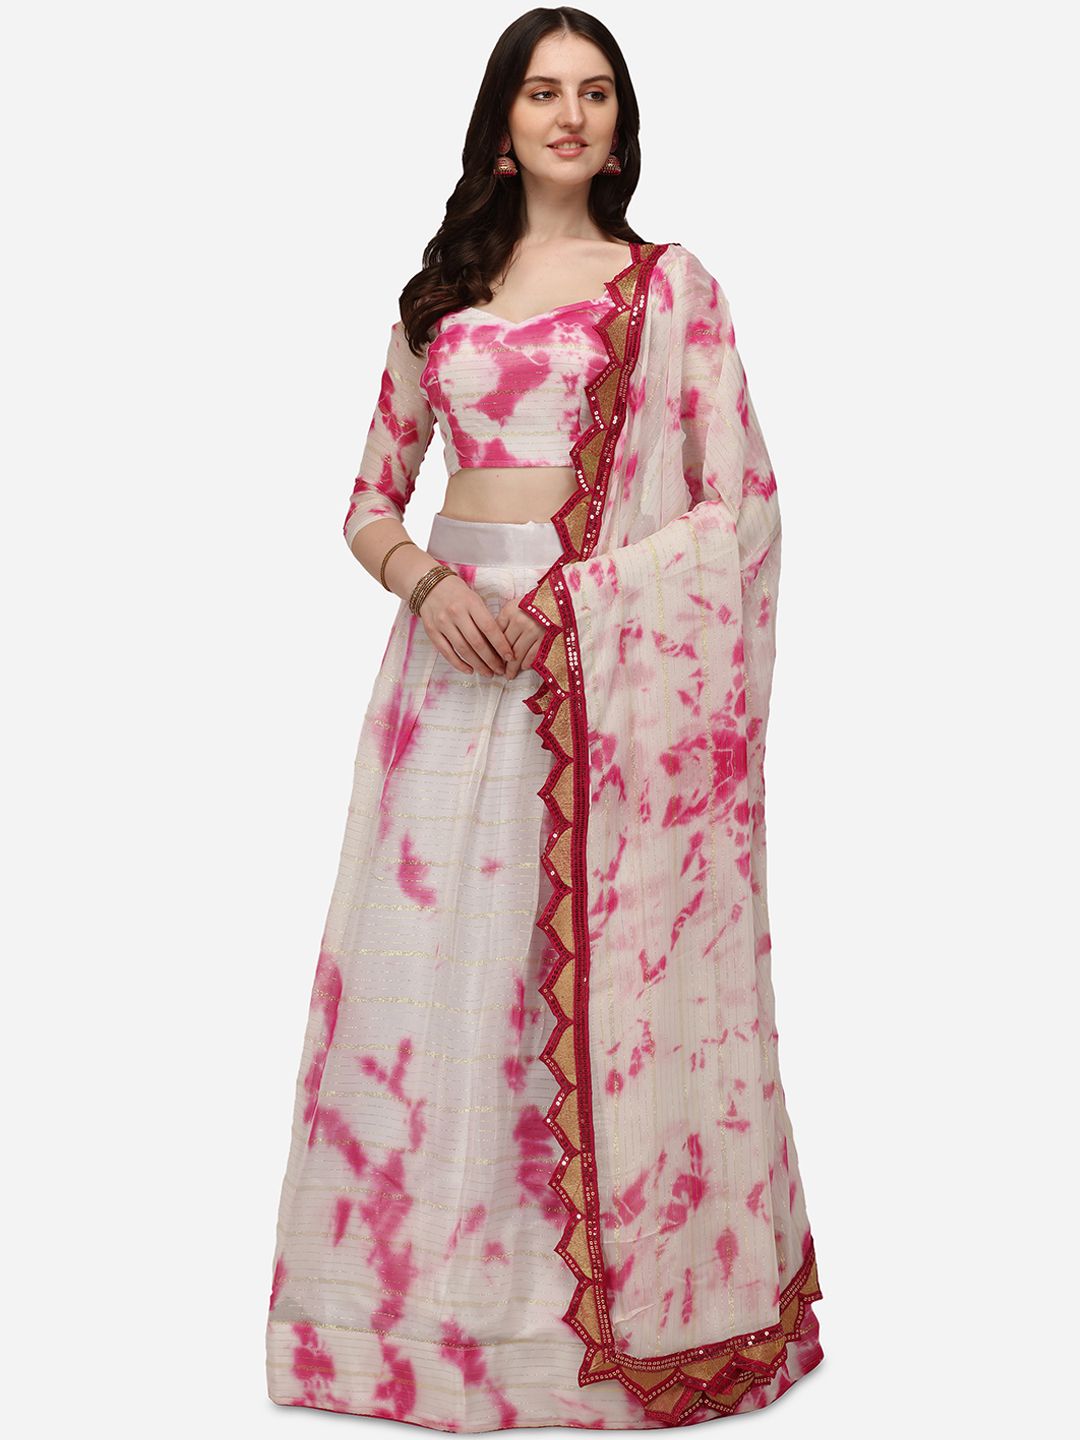 Pratham Blue White & Pink Dyed Semi-Stitched Lehenga & Unstitched Blouse With Dupatta Price in India